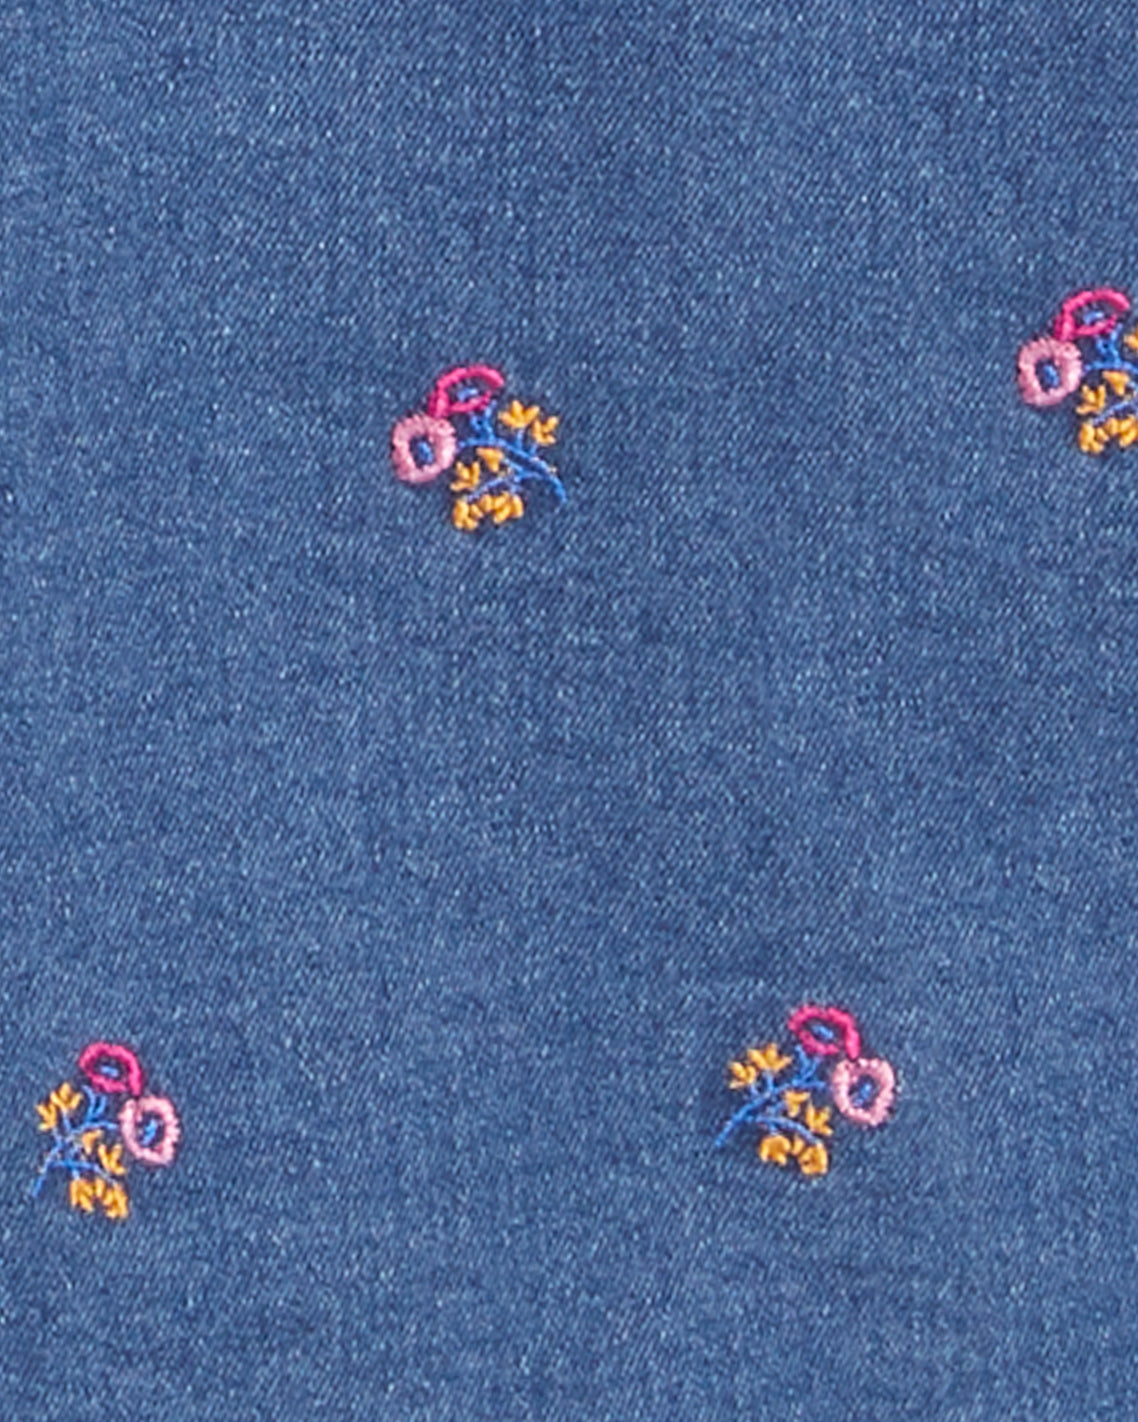 Kick Flare Jeans in Embroidered Posy